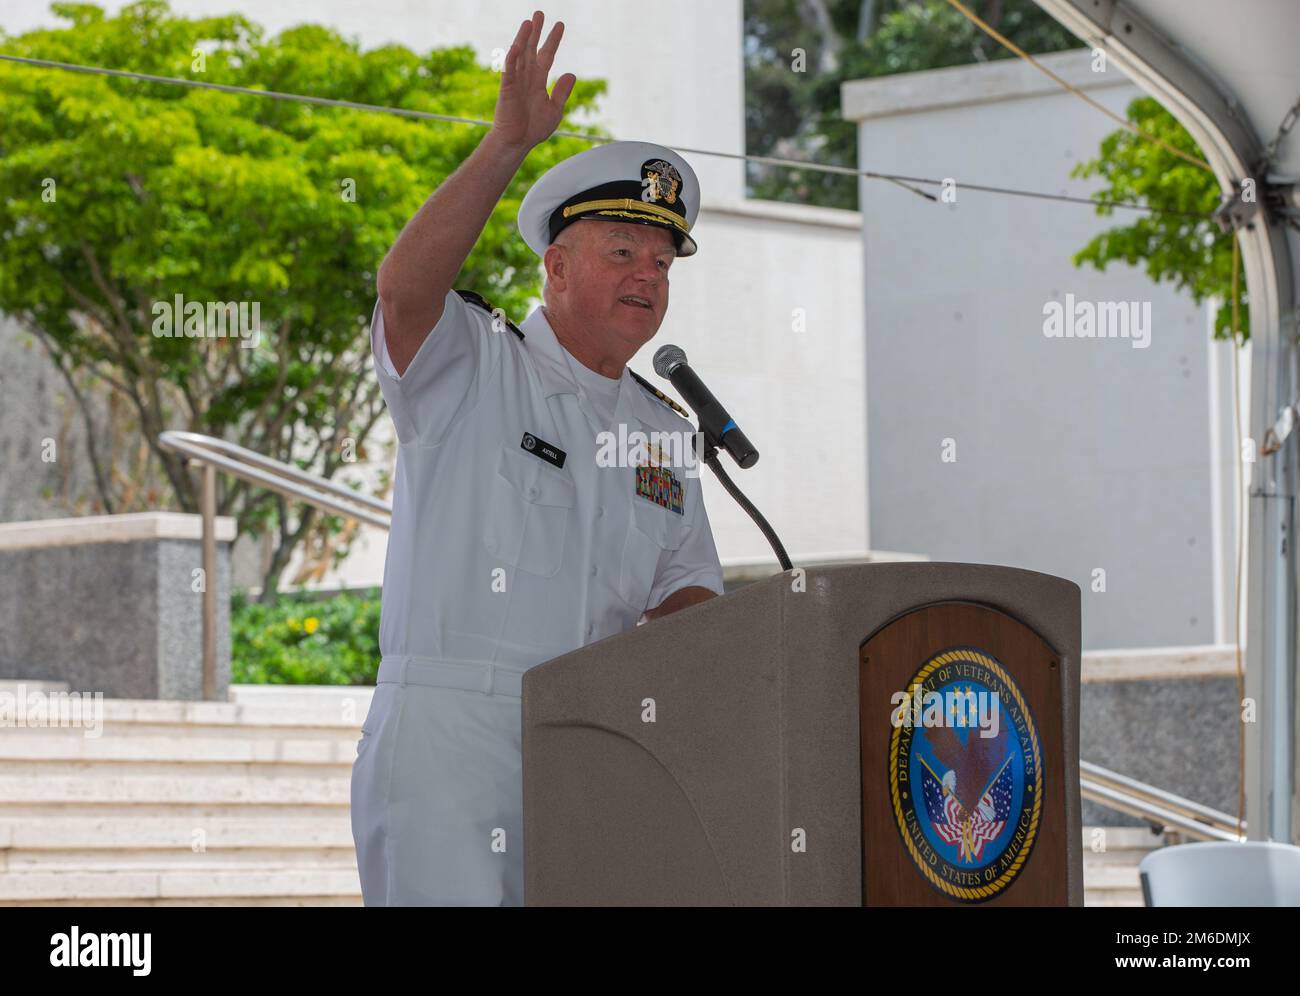 U.S. Navy Capt. Lee A. Axtell, Force Chaplain, U.S. Marine Corps Forces, Pacific delivers the benediction during the Australian and New Zealand Army Corps (ANZAC) Day 2022 ceremony at the National Memorial Cemetery of the Pacific, Honolulu, Hawaii, April 25, 2022. ANZAC Day commemorates the sacrifices made by all Australians and New Zealanders who have served and died in all wars, conflicts and peacekeeping missions around the world. This date marks the anniversary of the first major military action fought by Australia and New Zealand during World War I and is the 50th year MARFORPAC has provi Stock Photo